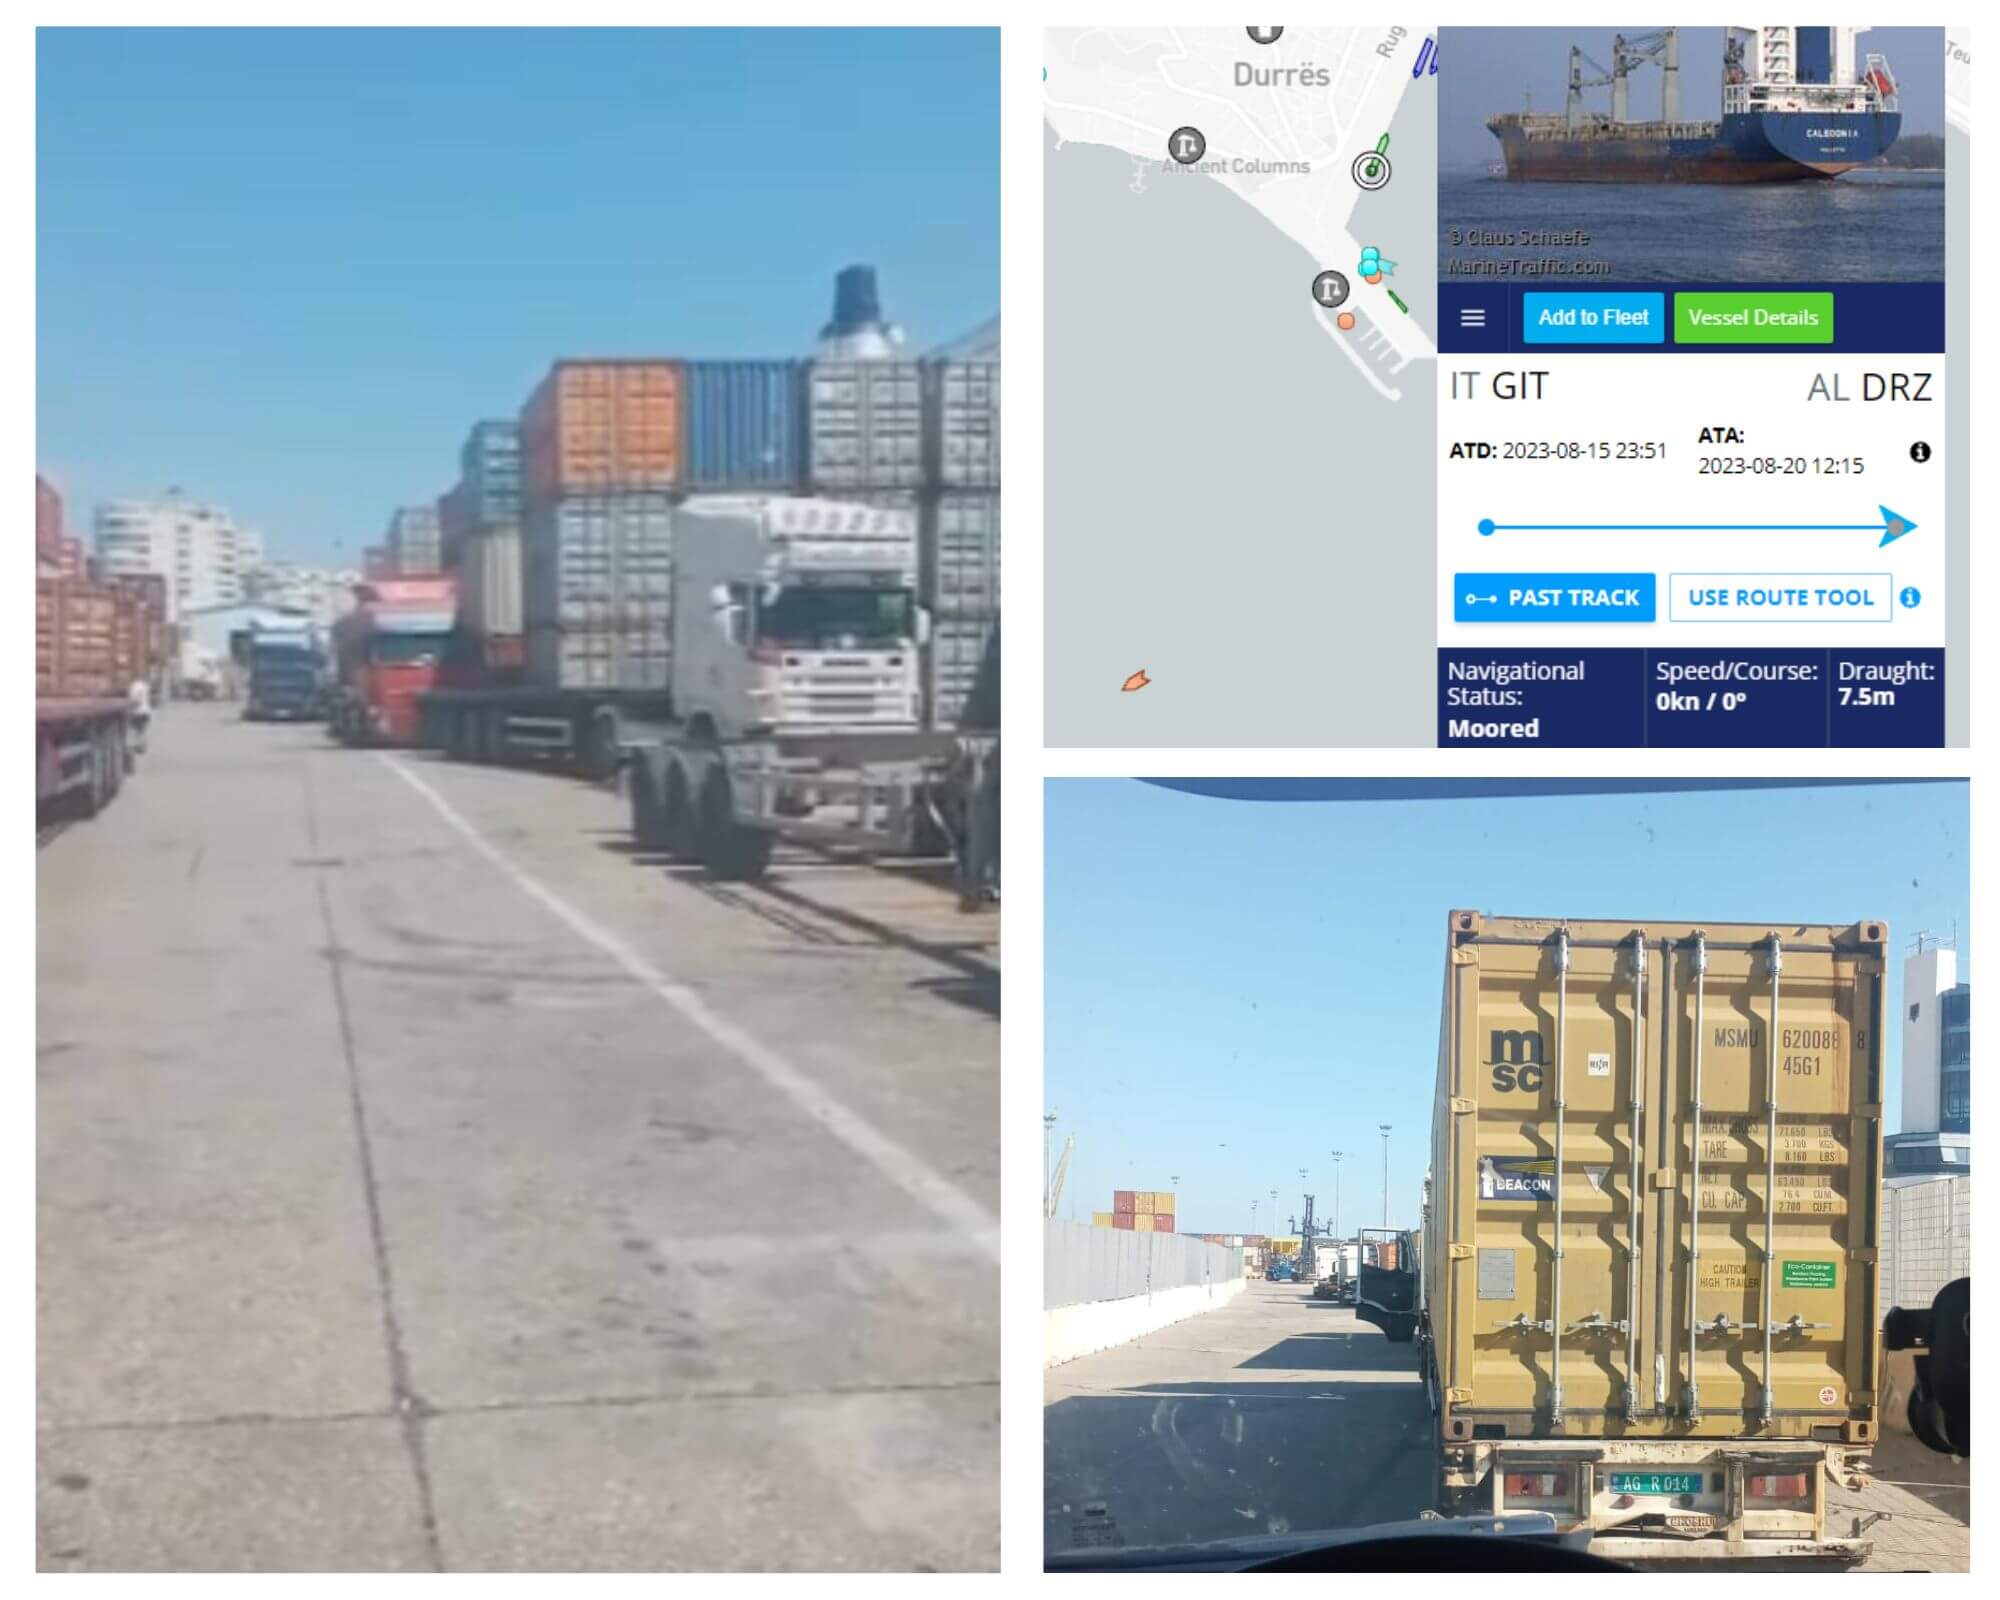 WORLD TRANSPORT OVERSEAS (Albania) become support to Durres port congestion situation